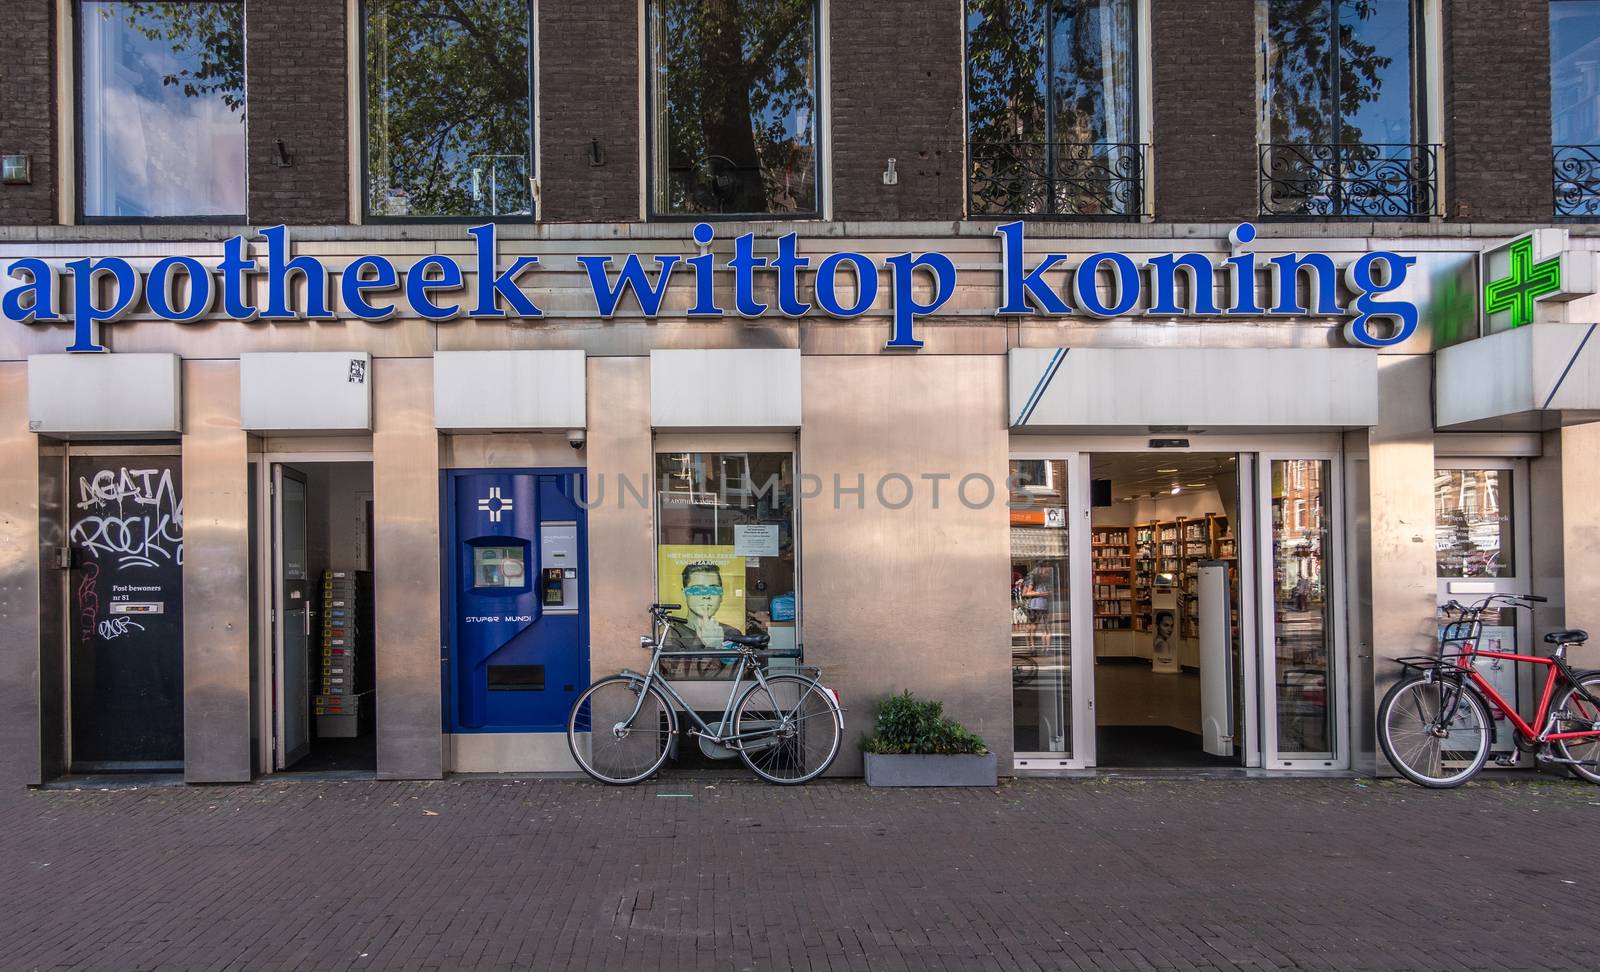 Amsterdam, the Netherlands - July 1, 2019: Facade of pharmacy Wittop Koning with bikes in front, dark blue name sign and the classic green cross light. Located in street called Overtoom.